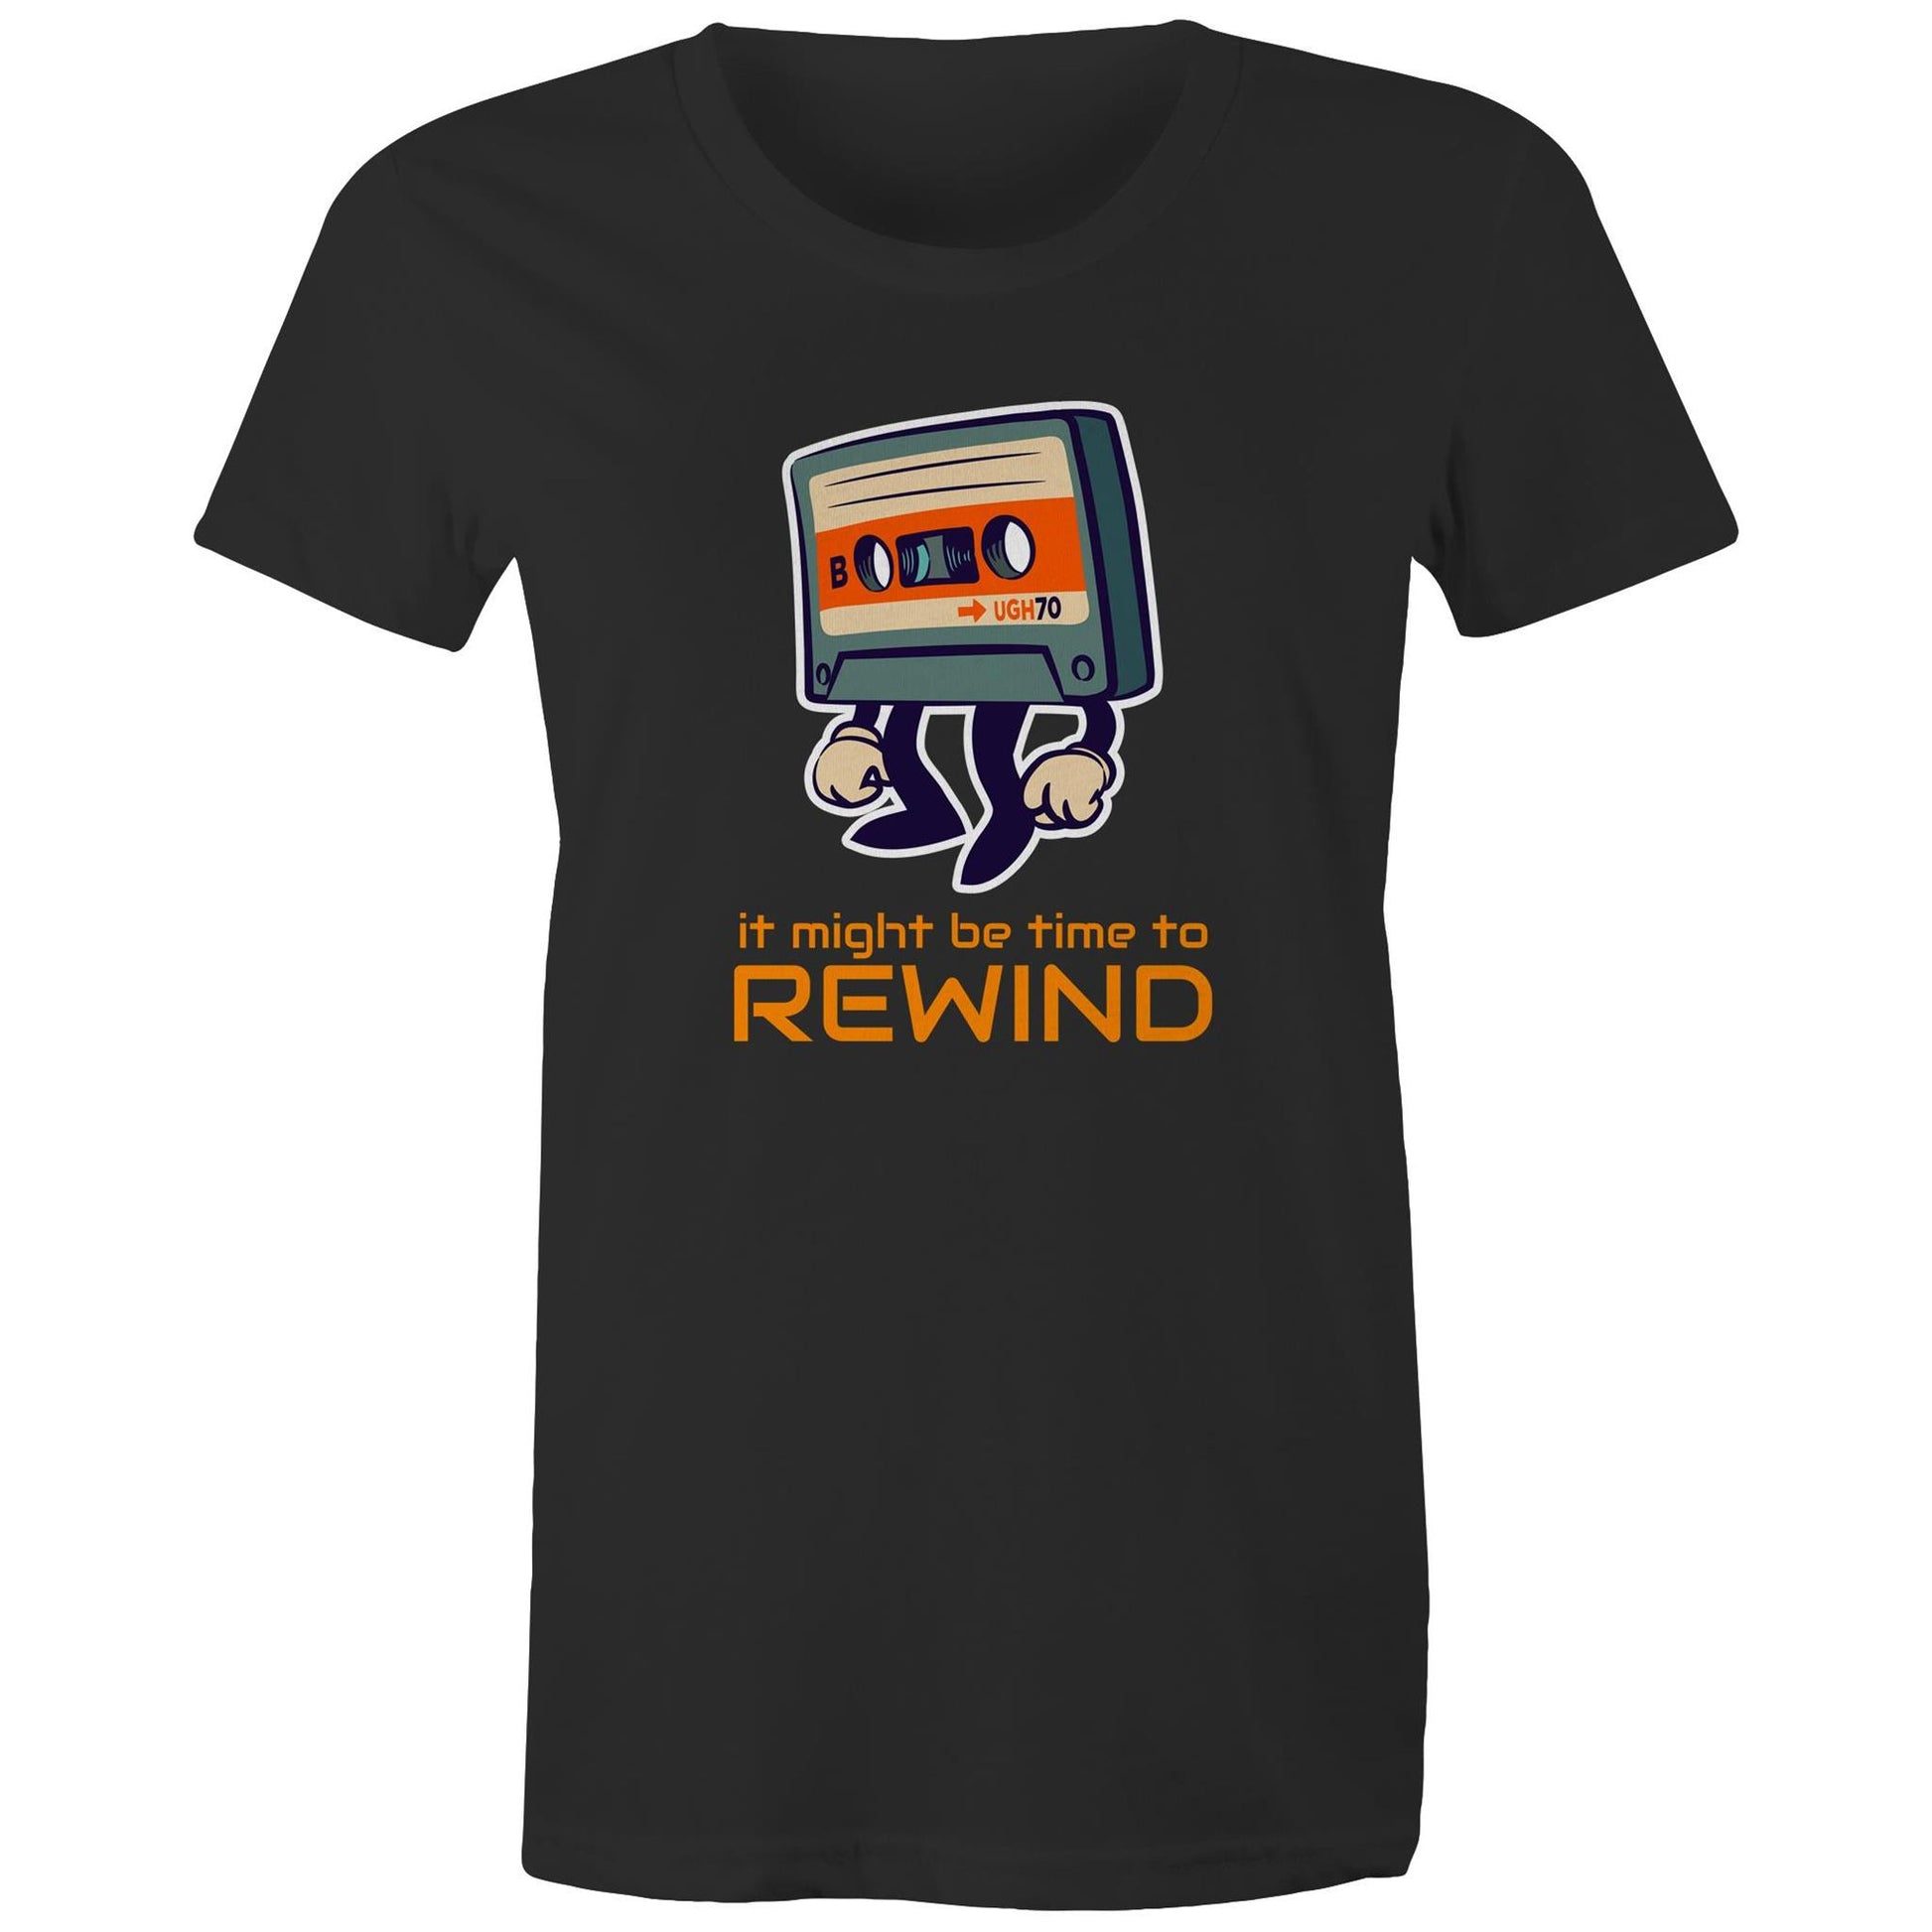 It Might Be Time To Rewind - Womens T-shirt Black Womens T-shirt Music Retro